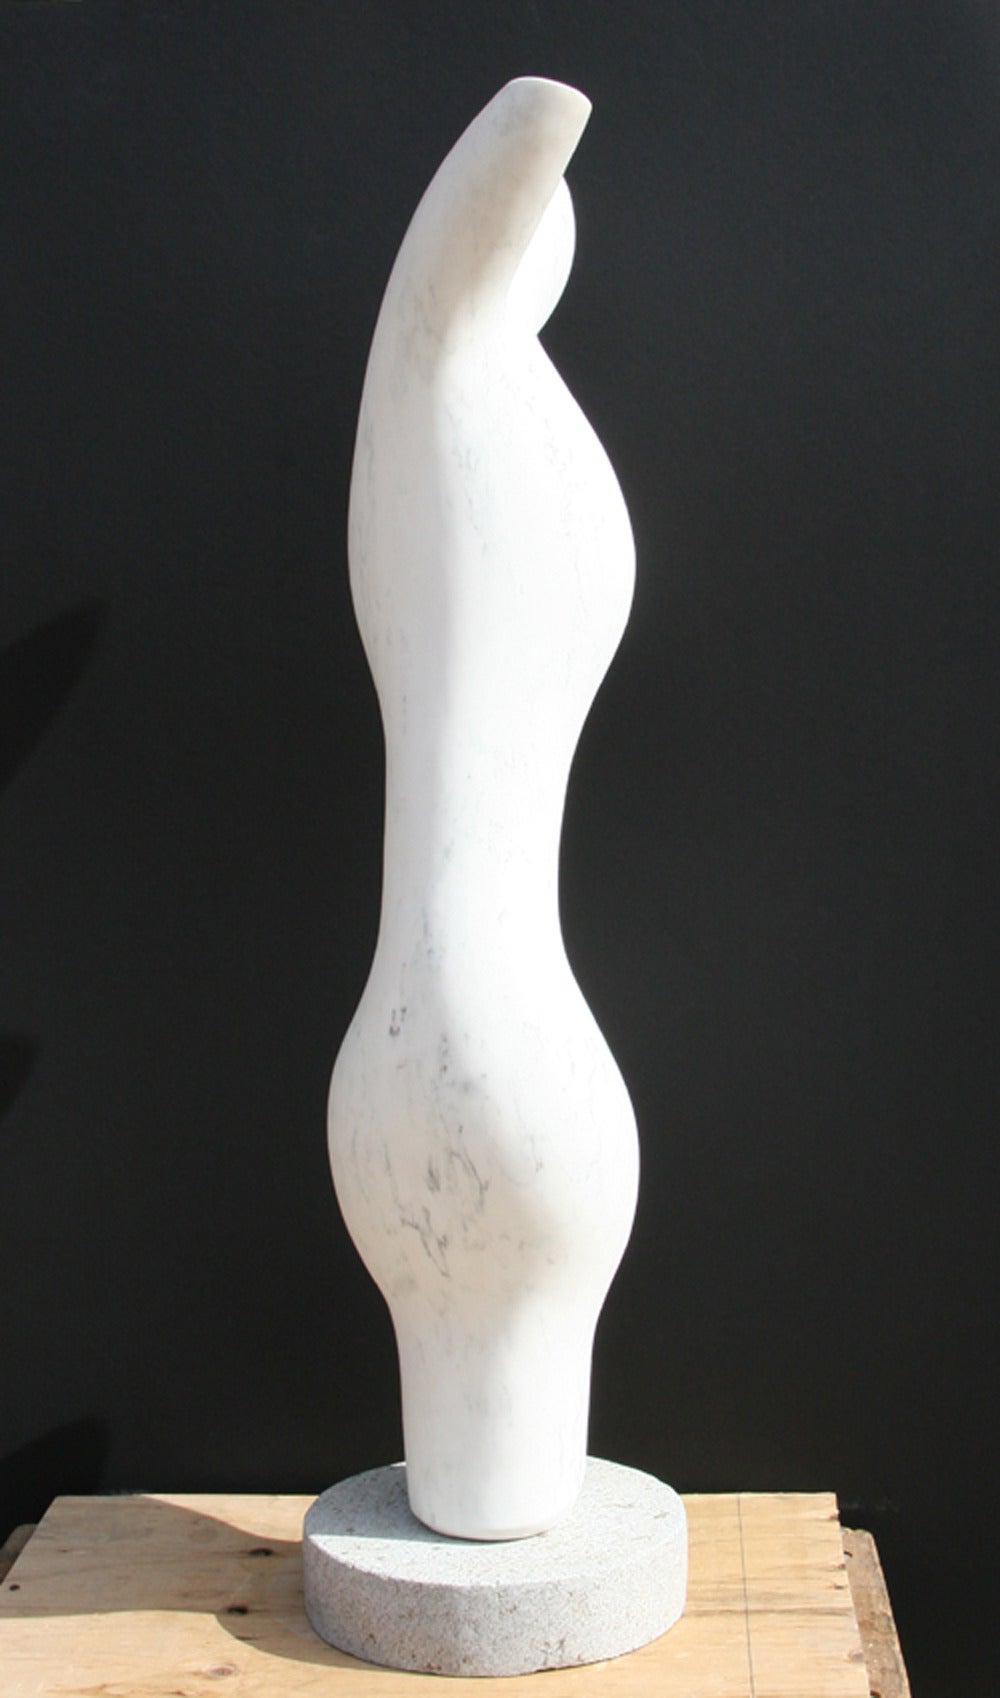 A white marble sculpture by Mario DeNoto. A modern abstract figure of subtly human-like features and slight gray veining. 
 
Artist: Mario DeNoto
Title:	Abstract Figure
Medium:	White Marble Sculpture on a Granite Base
Size: 46 x14 x 10 inches